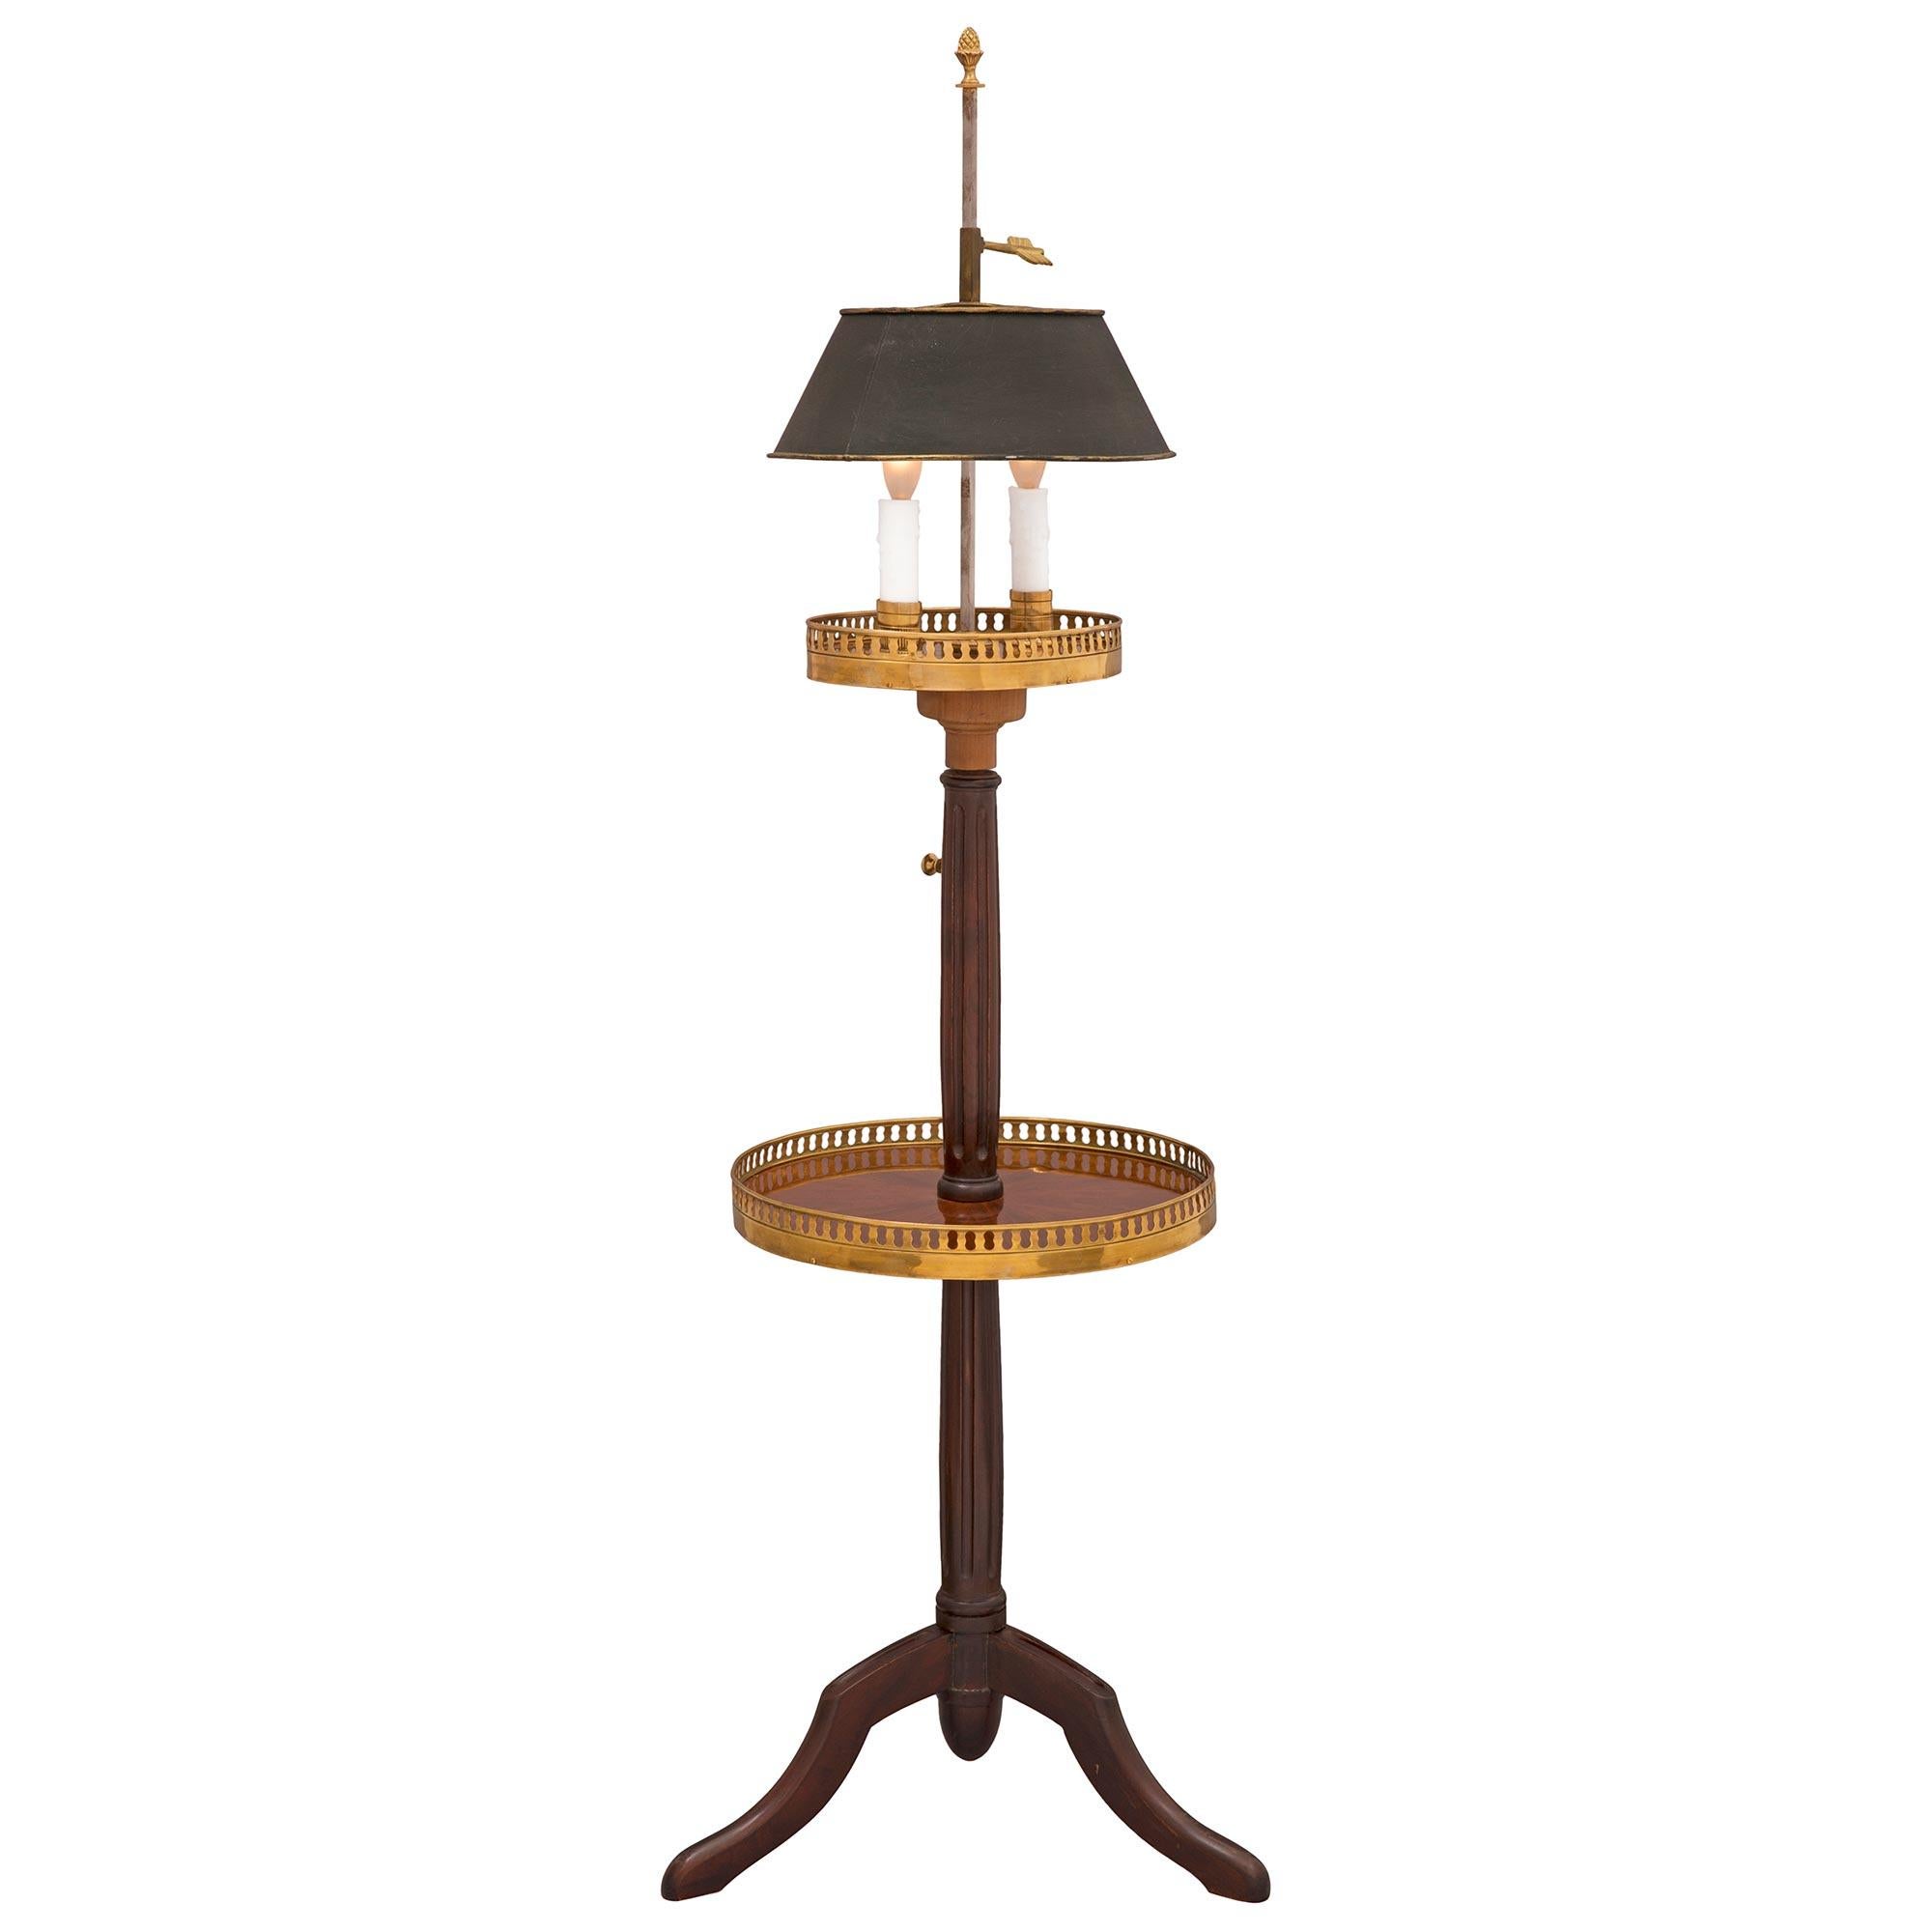 A charming and very unique French 19th century Louis XVI st. Mahogany and ormolu side table/lamp. The two tiered table is raised by three elegantly curved legs below a baluster shaped circular fluted support. At the center is a circular display tier